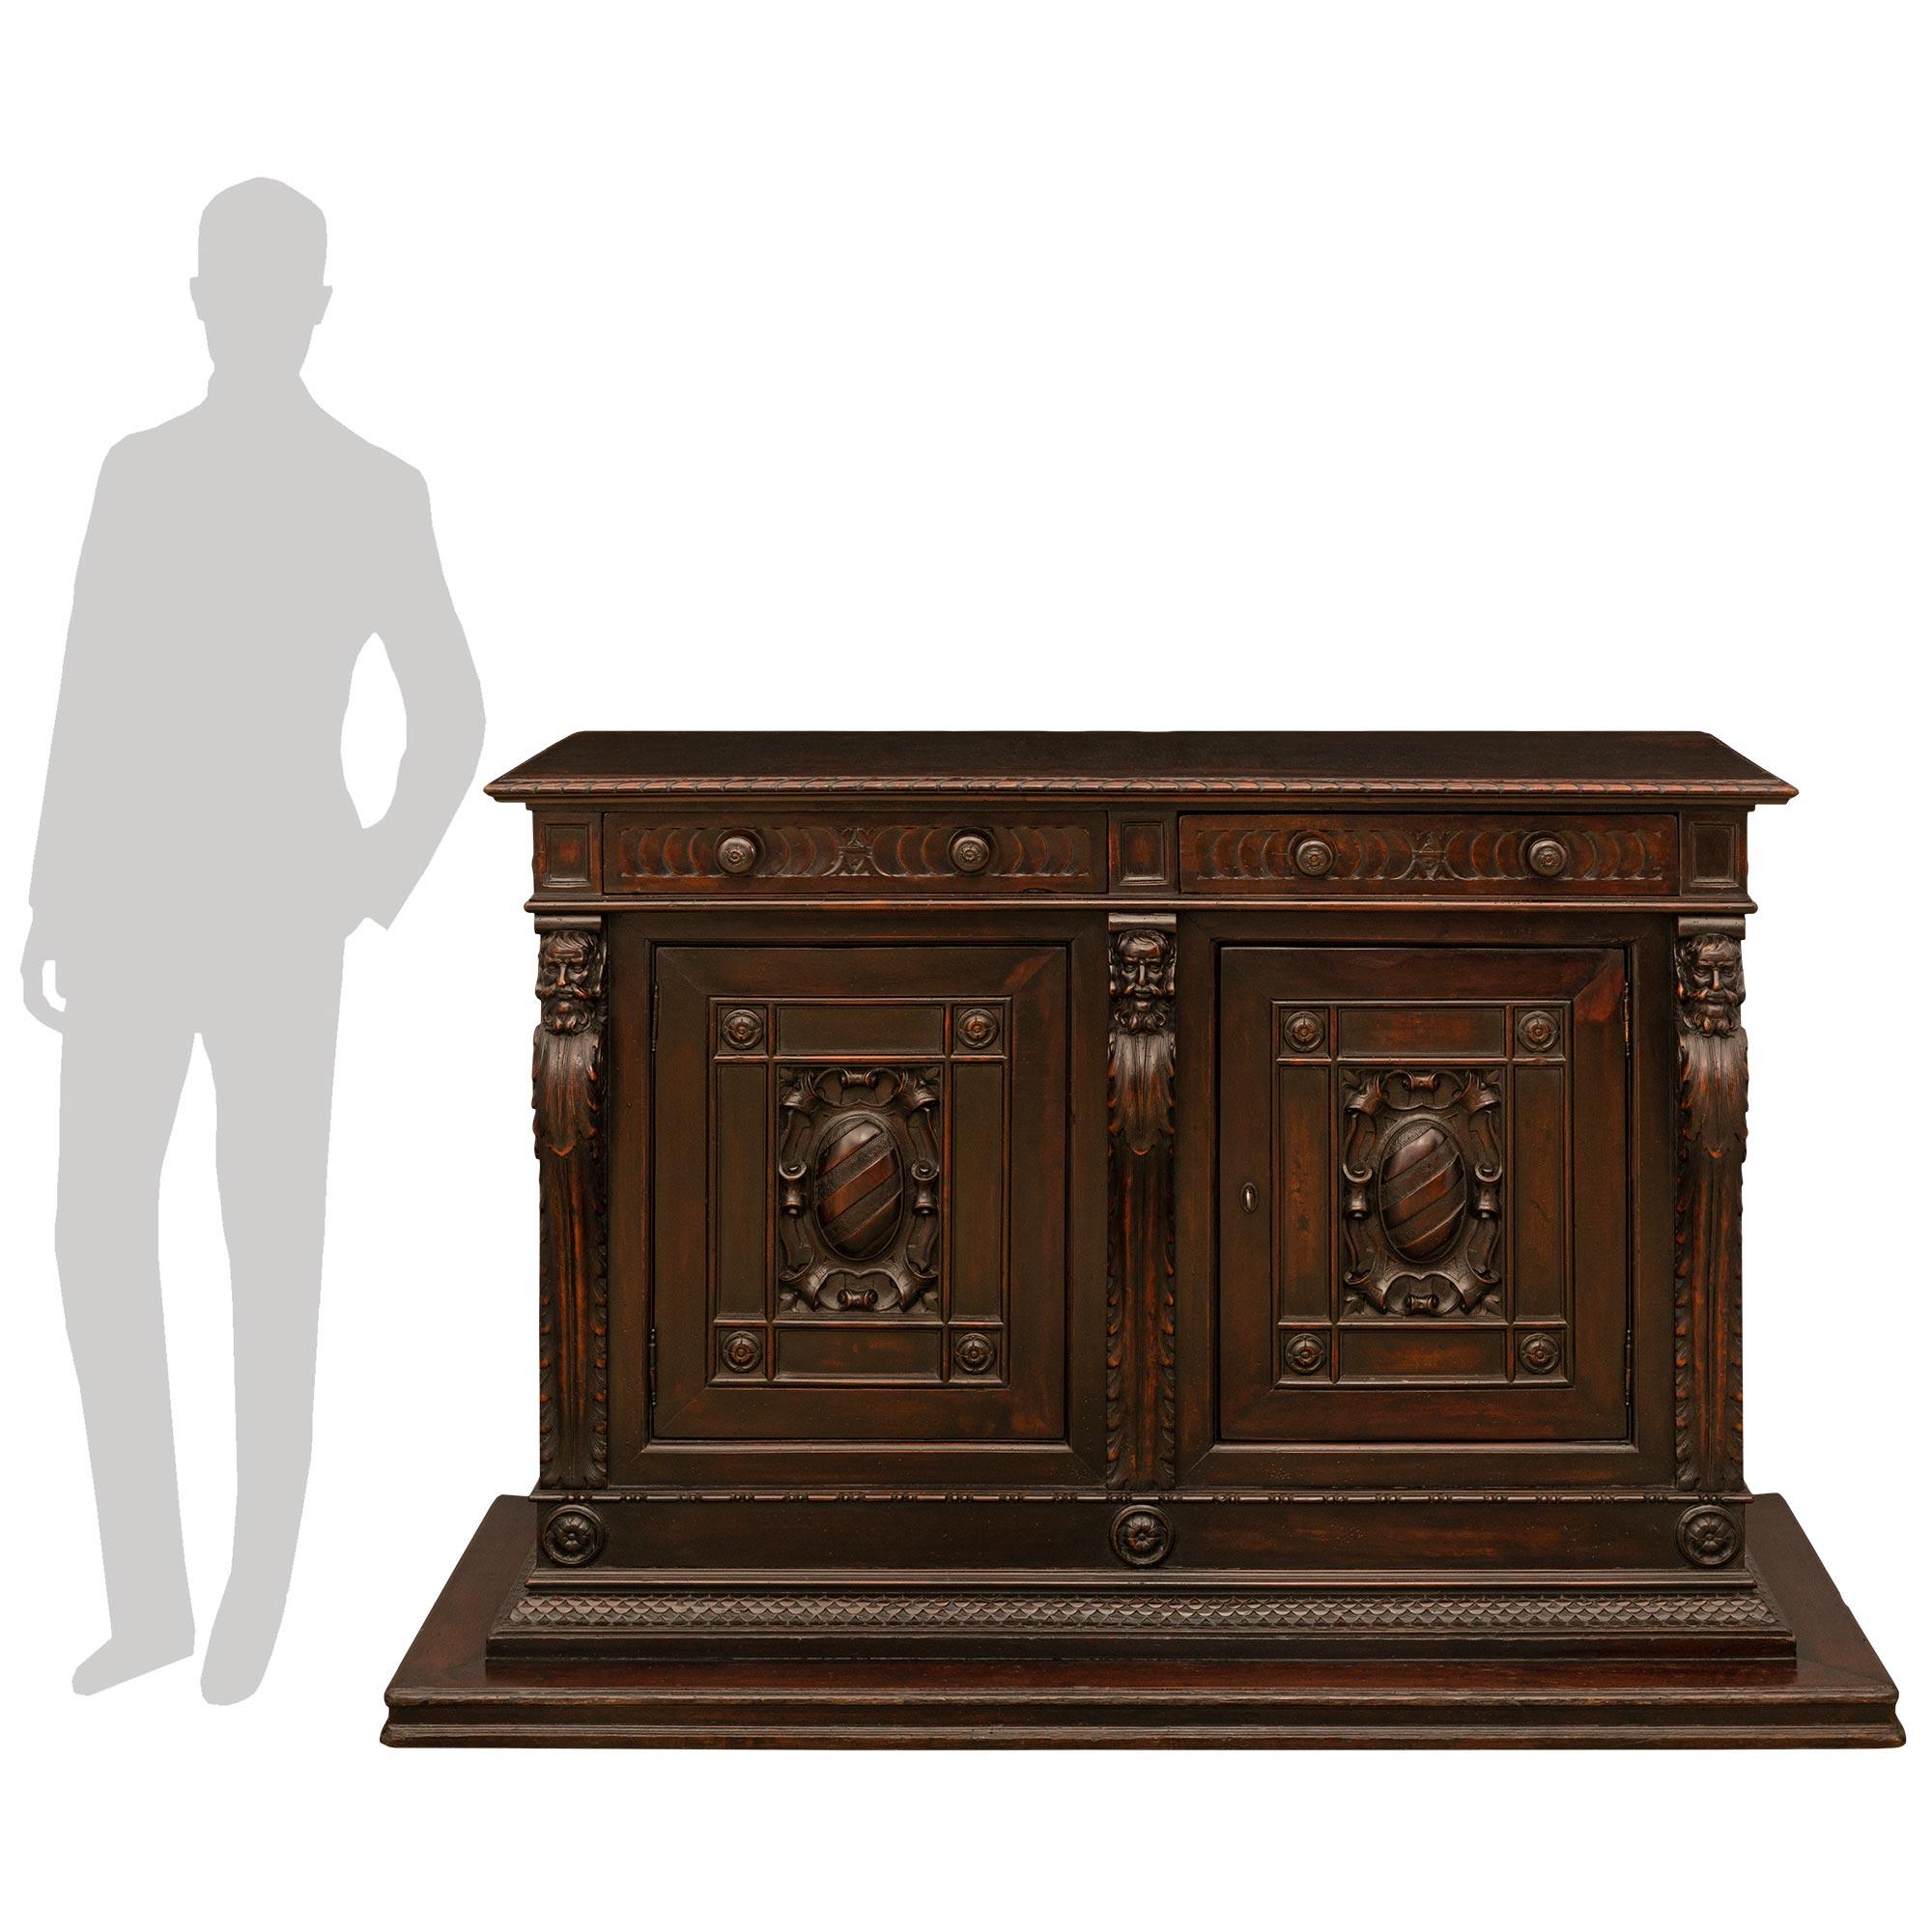 A most handsome and impressive pair of Italian 18th century, two door, two drawer walnut buffets, from Northern Italy. Each buffet is raised by a unique and most decorative mottled rectangular base below a beautiful carved foliate band. At the